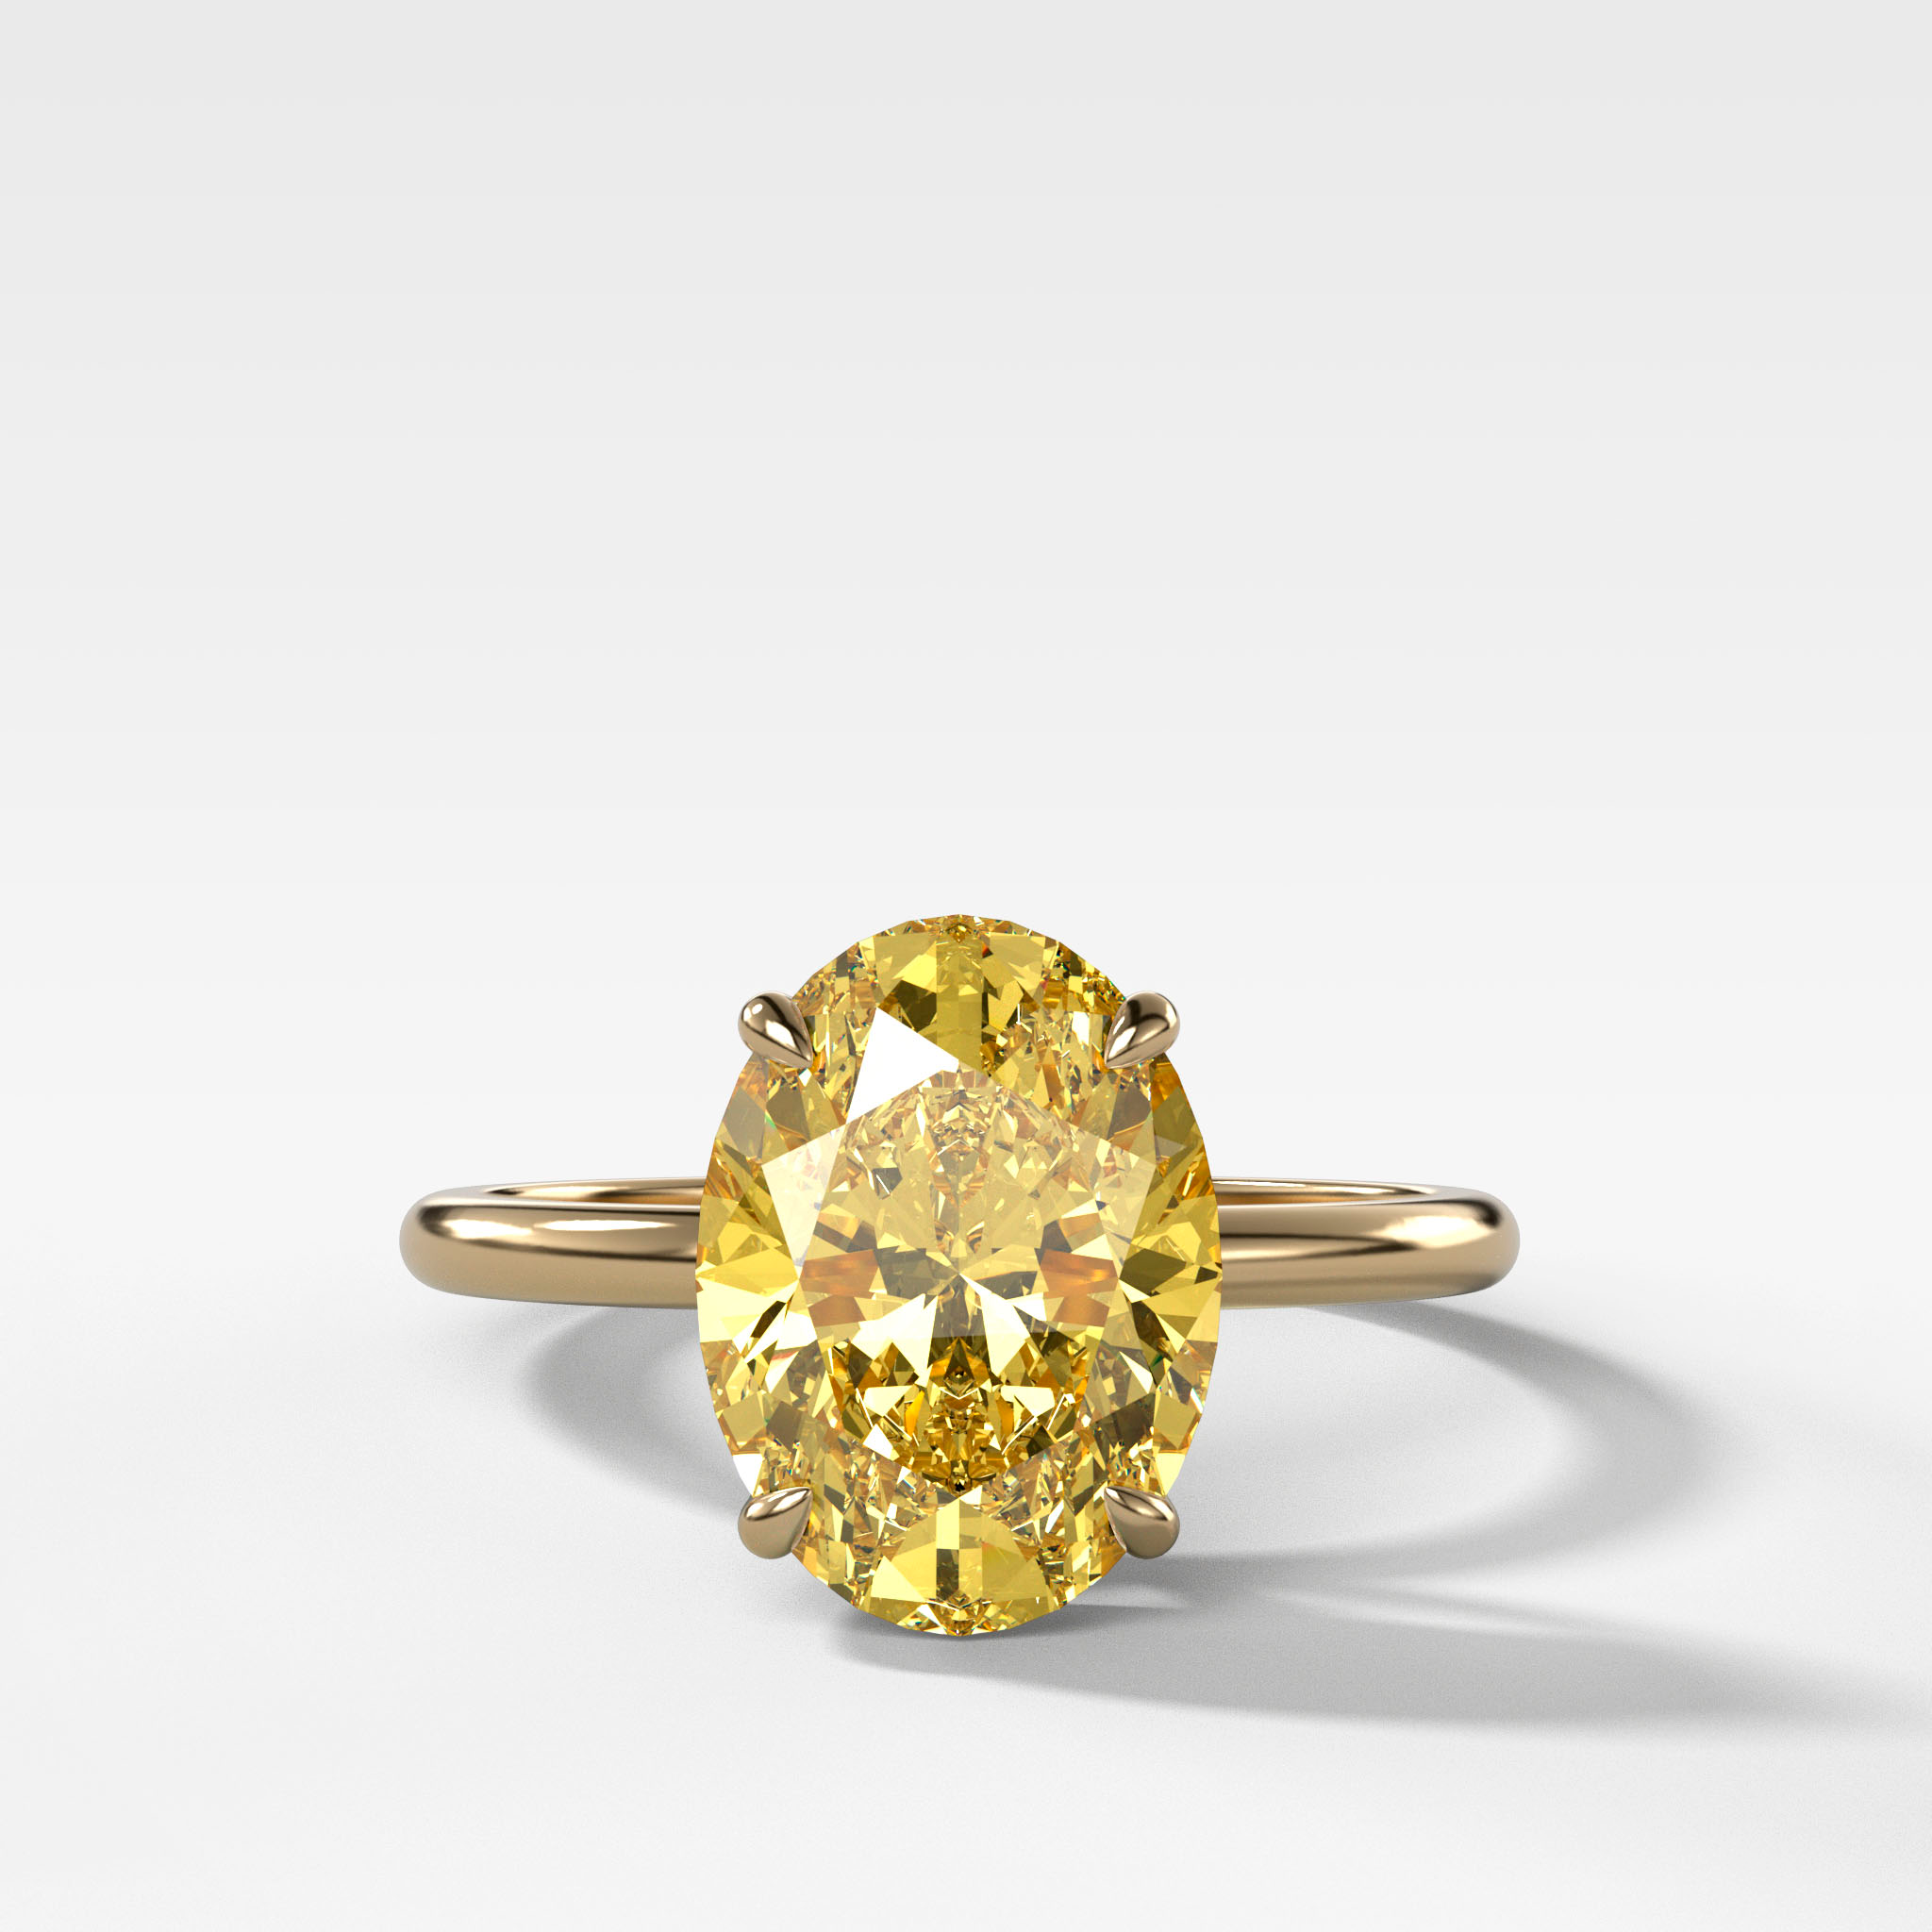 GOODSTONE Thin + Simple Solitaire Engagement Ring With Canary Yellow Oval Cut Diamond